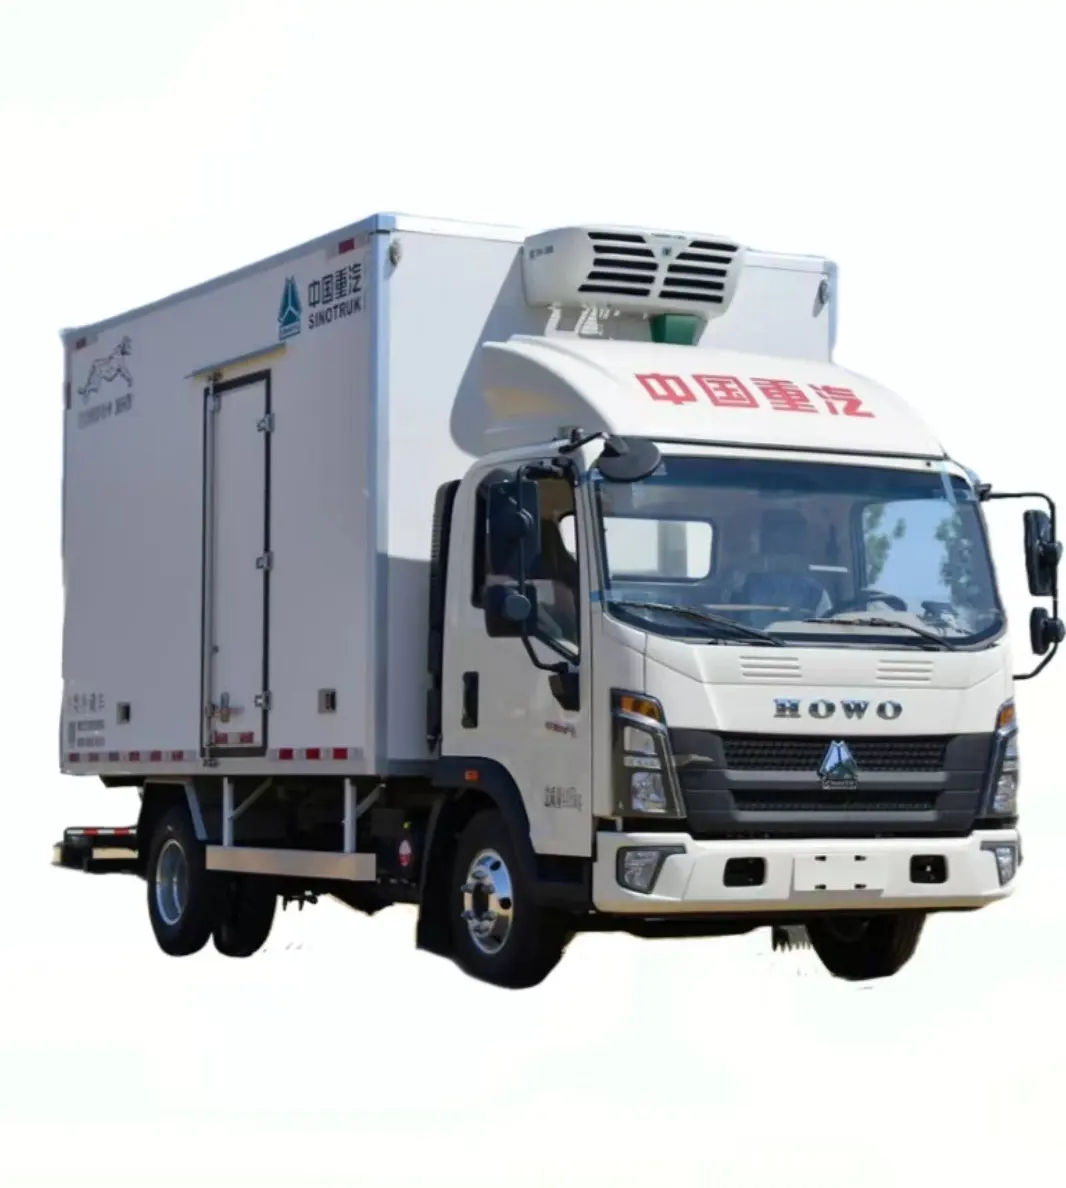 1-10TFreezing truck Howo Cold Room Frozen Delivery 4*2 Mini Refrigerated Food Freezer Van Trucks Contain Refrigerator Box Truck